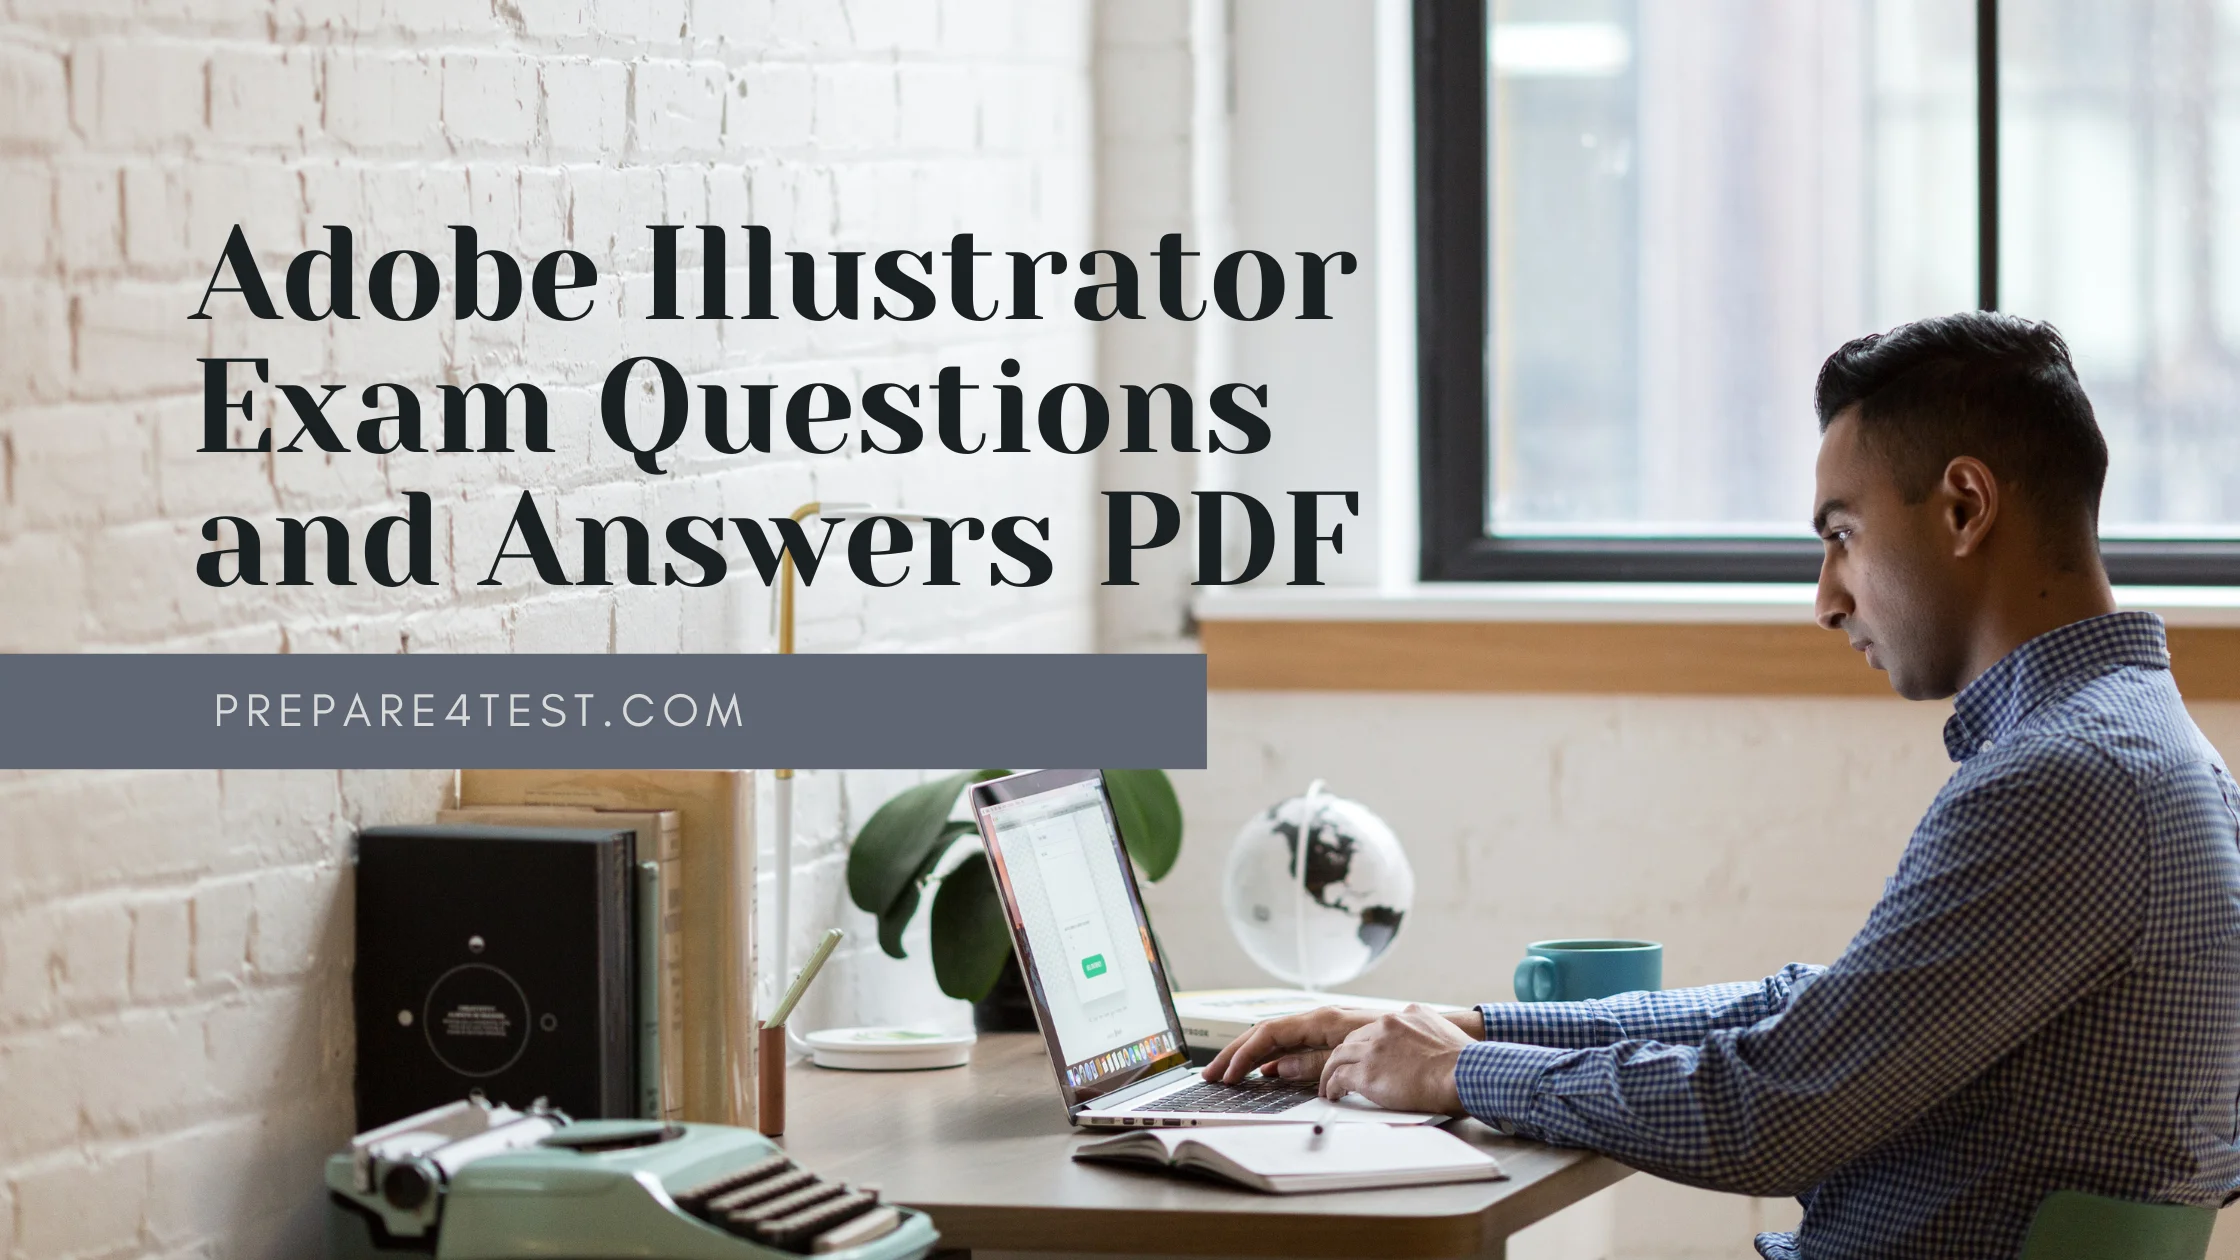 Adobe Illustrator Exam Questions and Answers PDF success